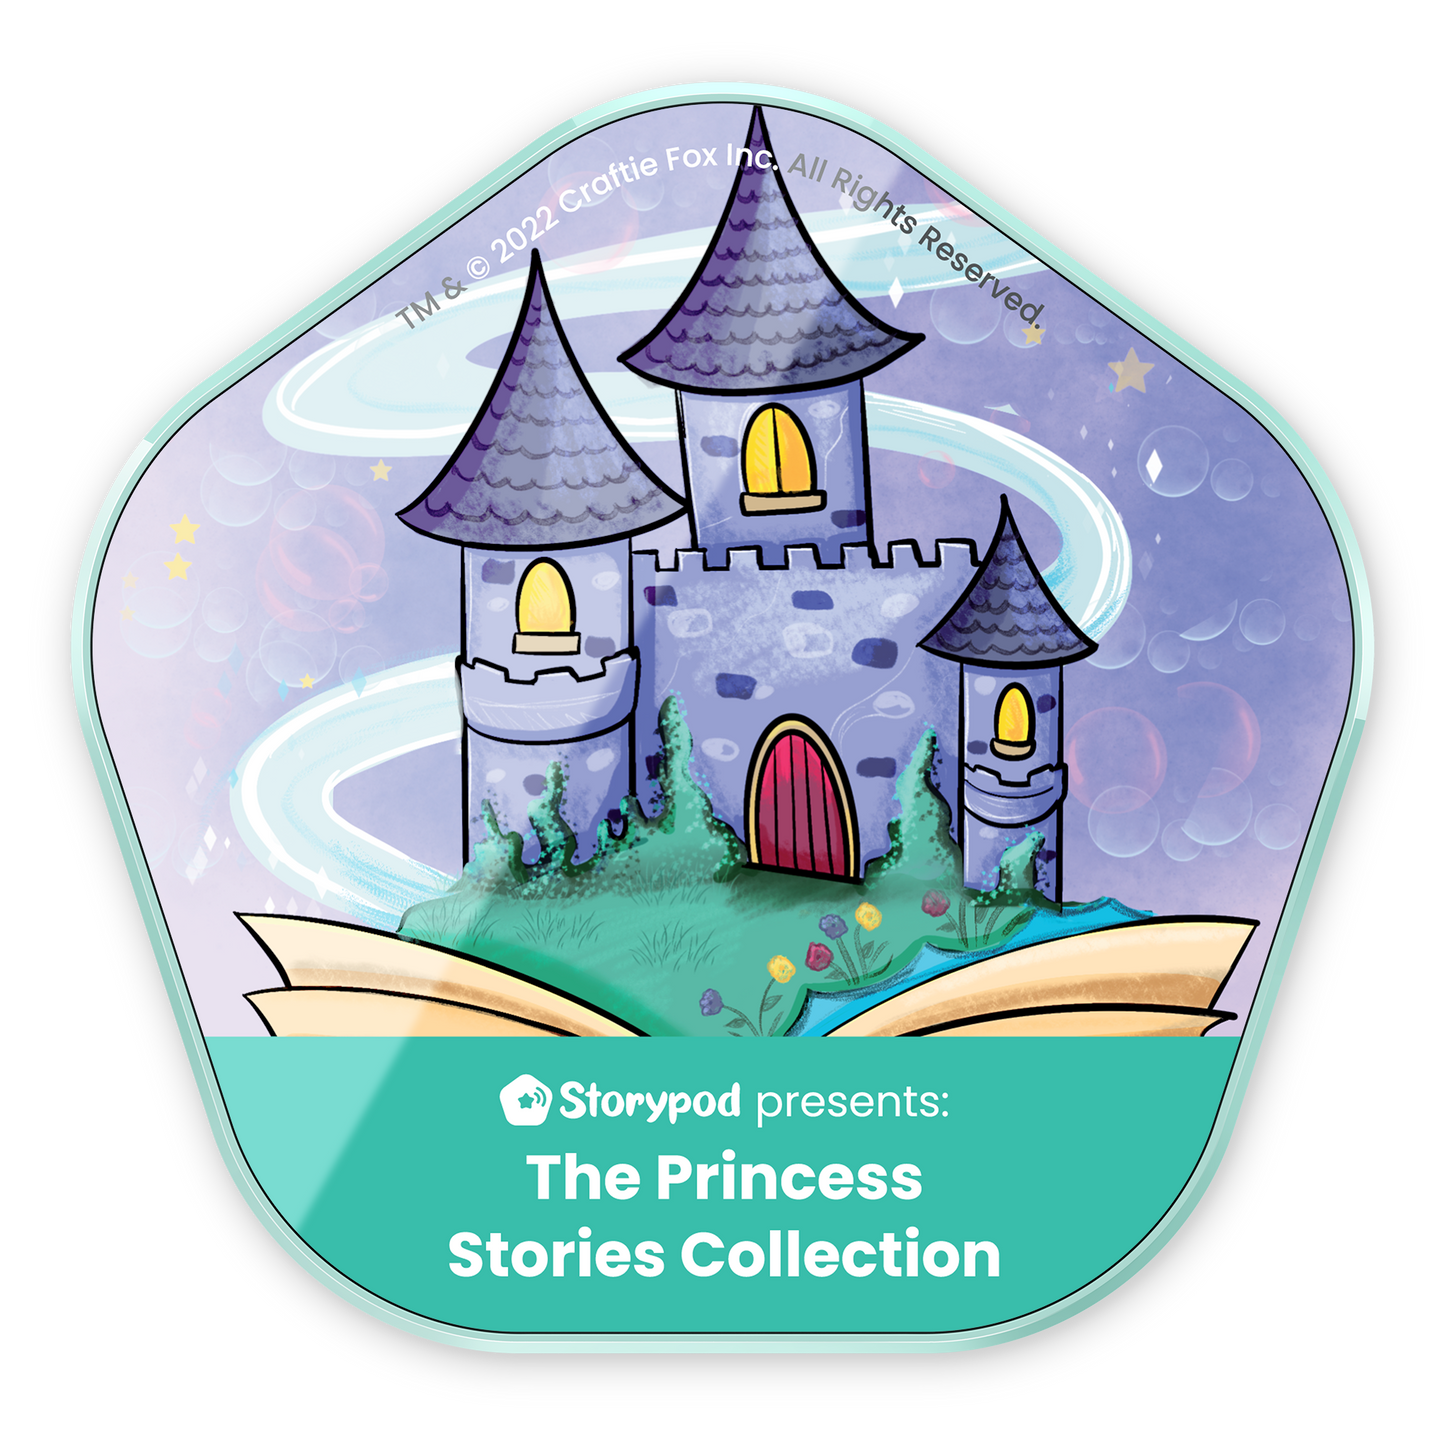 The Princess Stories Collection